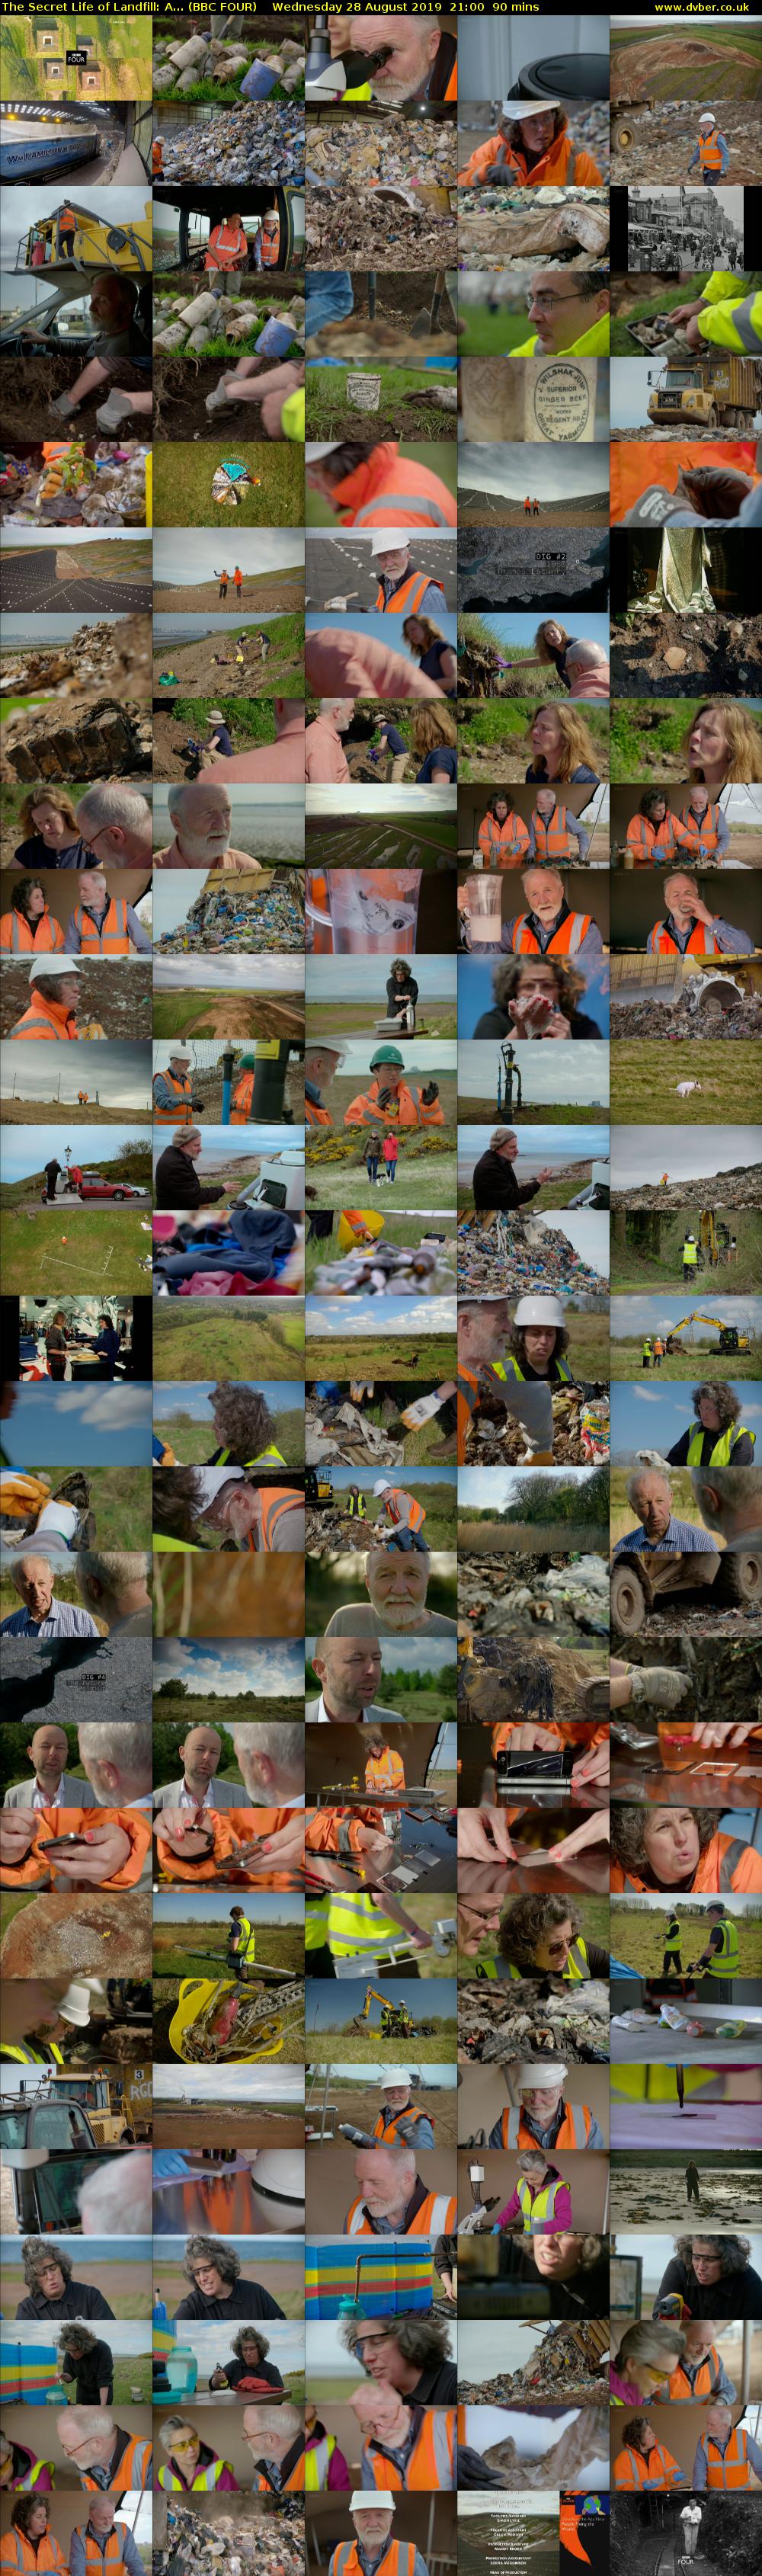 The Secret Life of Landfill: A... (BBC FOUR) Wednesday 28 August 2019 21:00 - 22:30